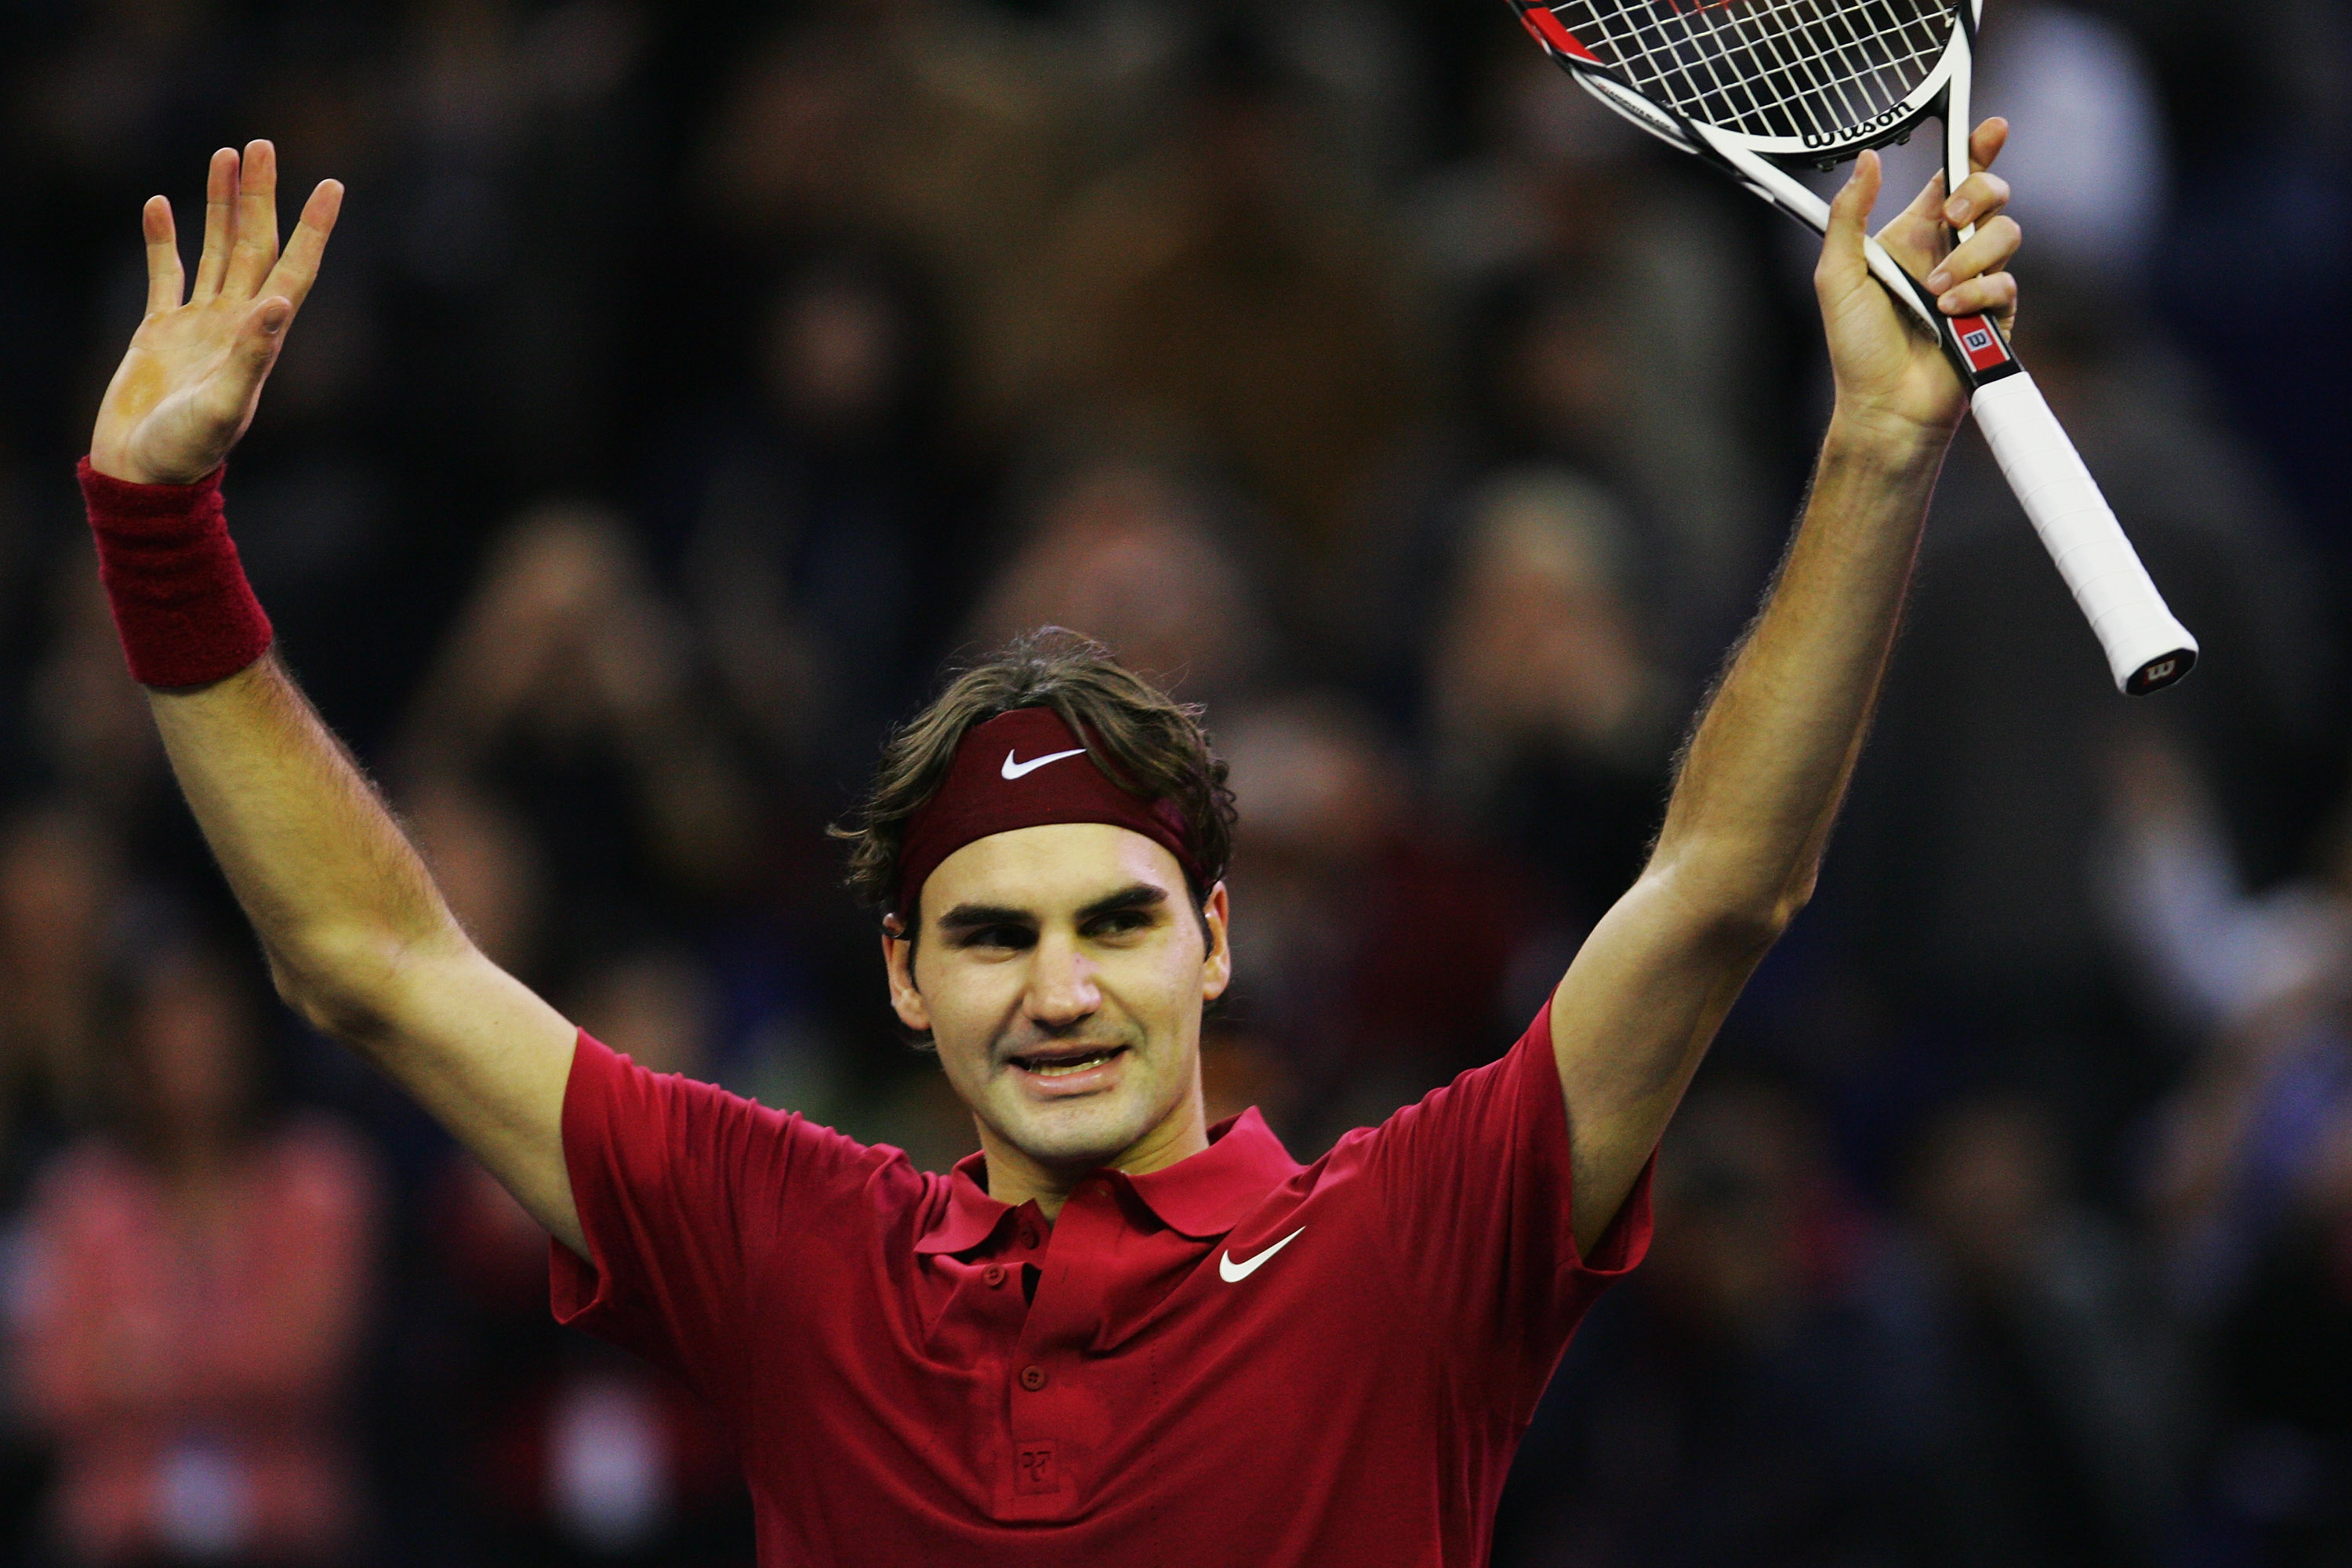 SHANGHAI, CHINA - NOVEMBER 18:  Roger Federer of Switzerland celebrates after he beat David Ferrer of Spain in the final match of the Tennis Masters Cup at Qi Zhong Stadium on November 18, 2007 in Shanghai, China.  (Photo by Andrew Wong/Getty Images)